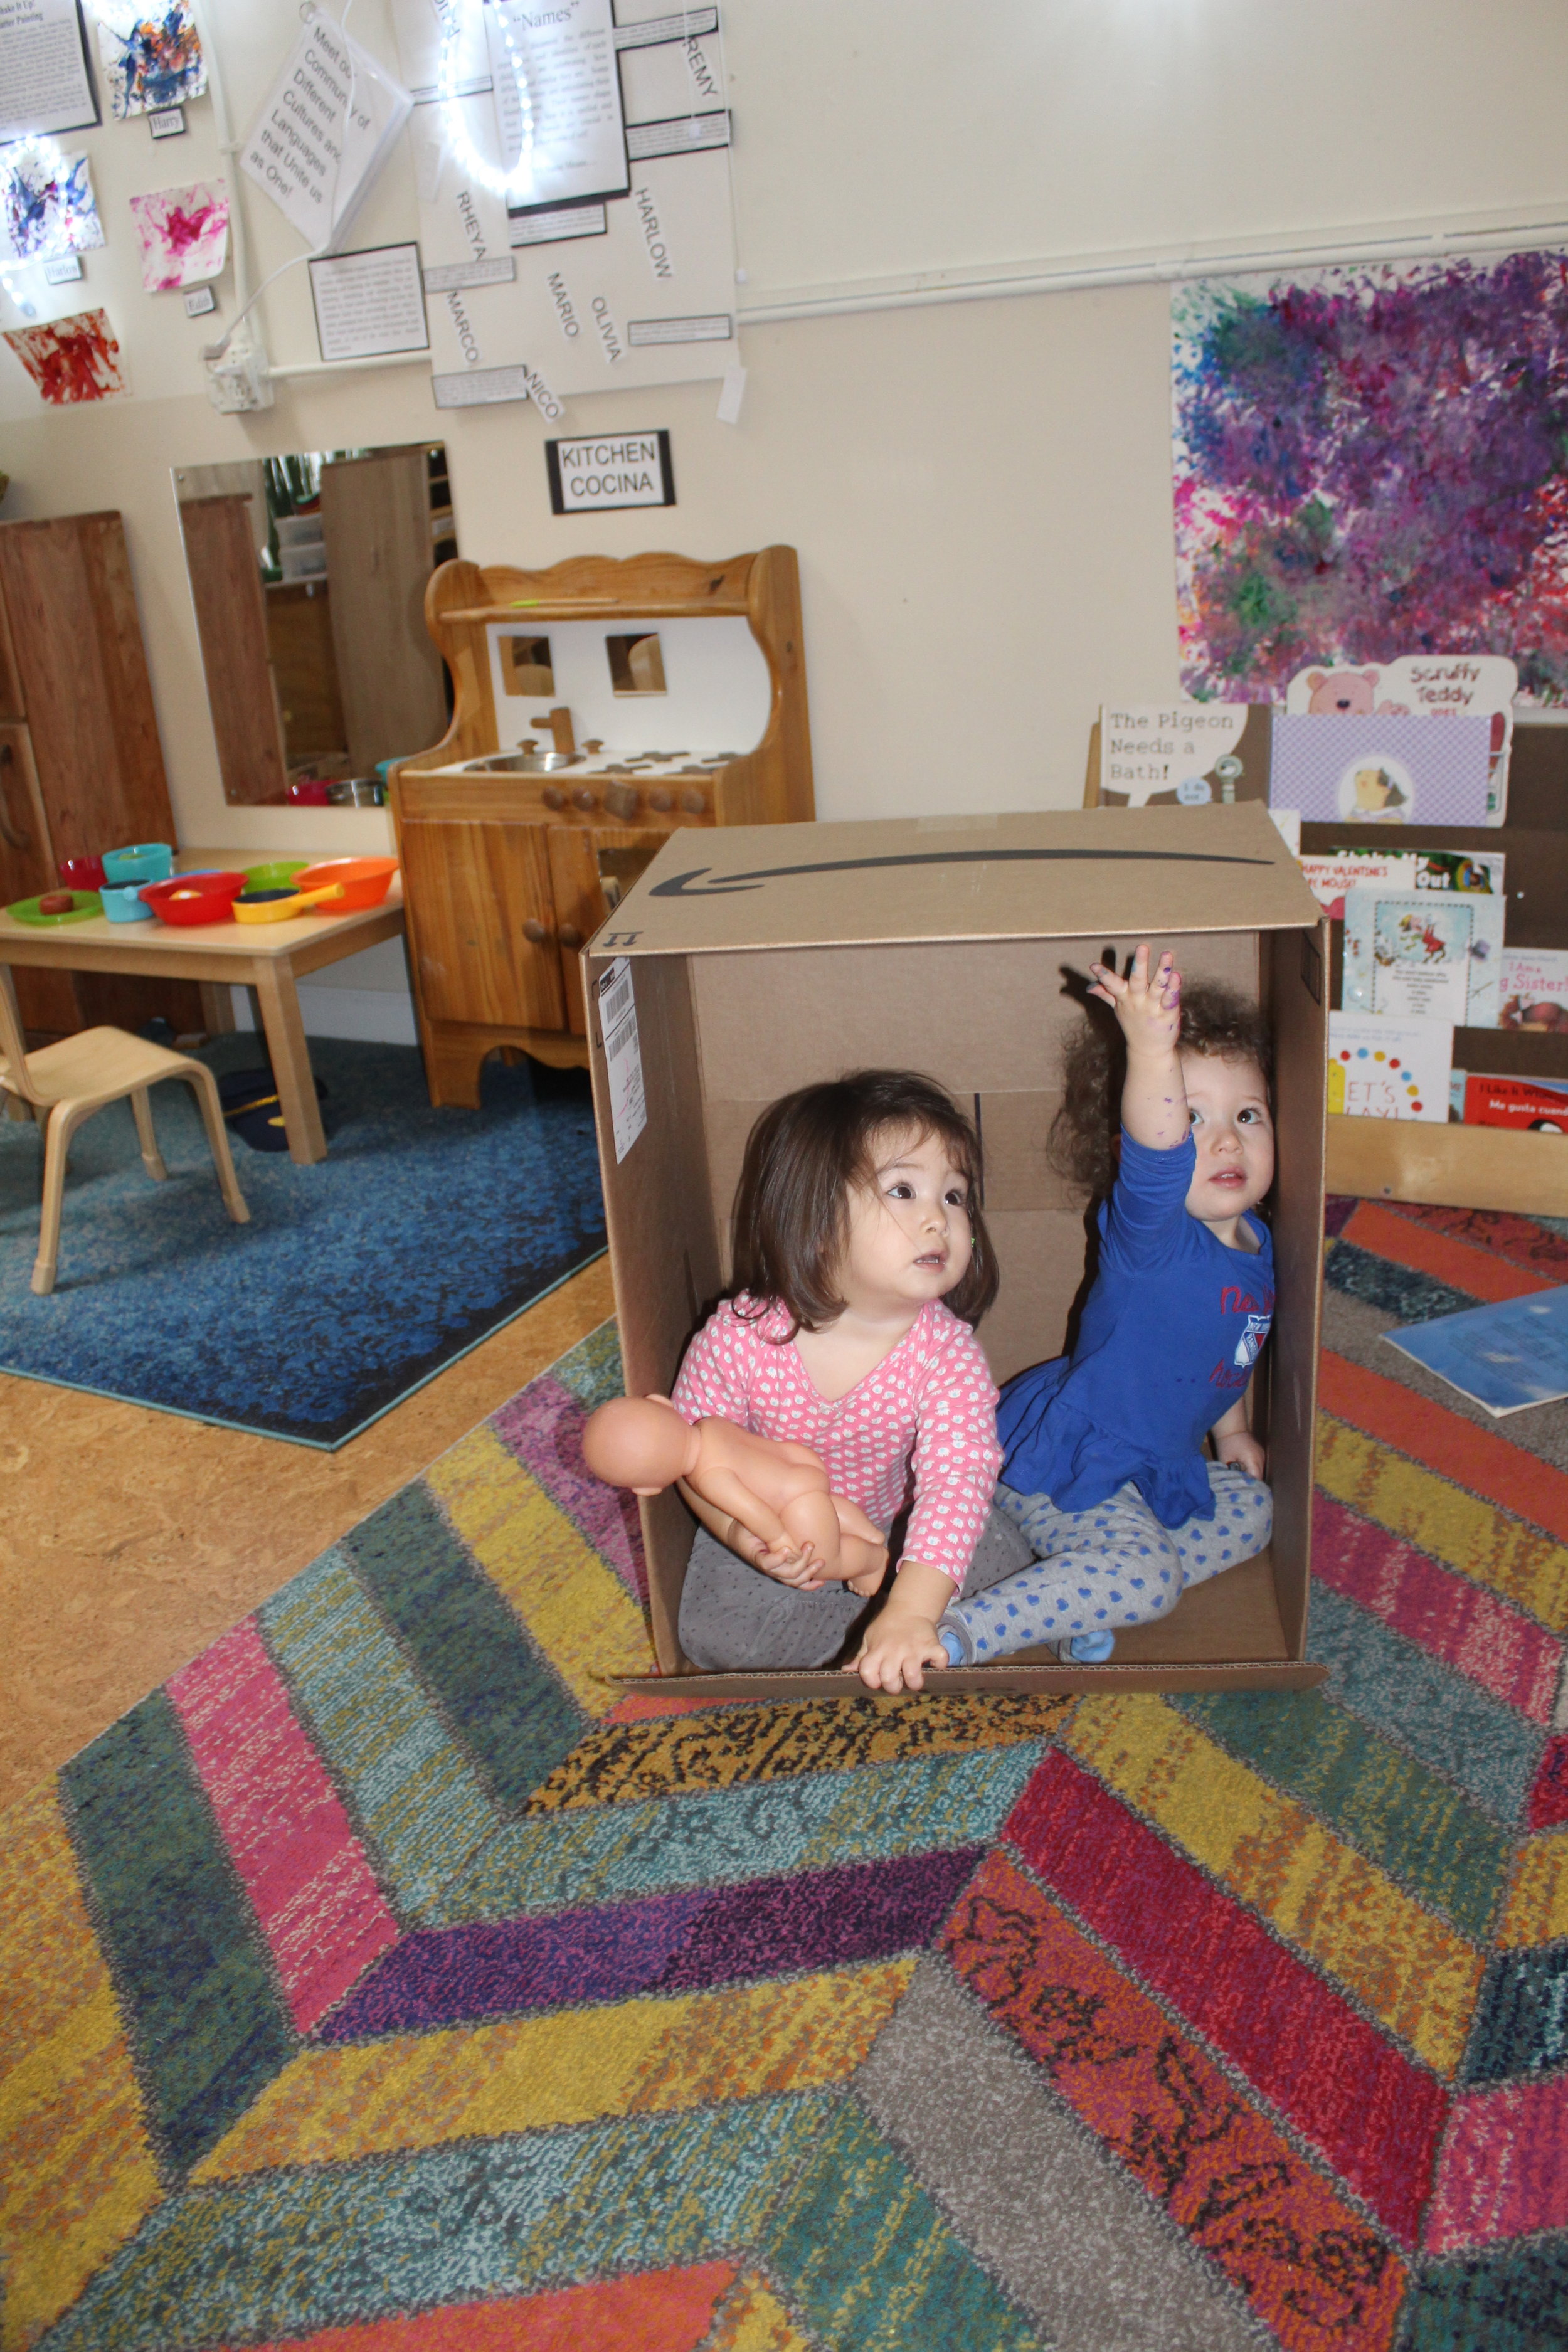  Remy looked curious and interested as she sat in the box. &nbsp;Soon, Rheya joined Remy in the box. &nbsp;The box appeared small for both children, but they both managed to create sufficient space. &nbsp; It seemed that the two of them had a lot of 